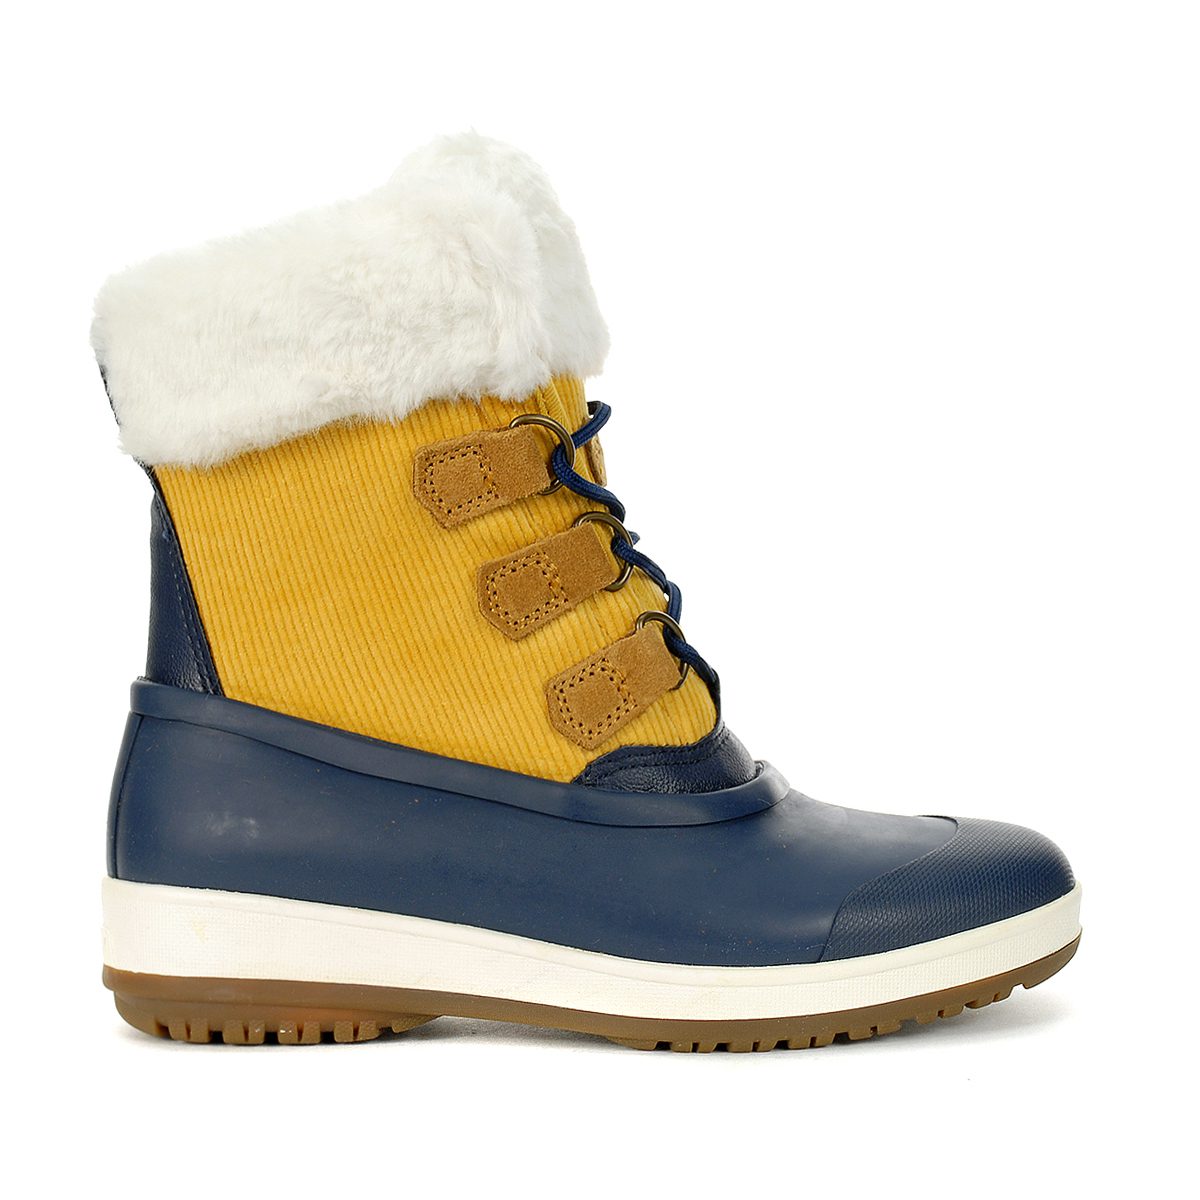 sperry navy boots